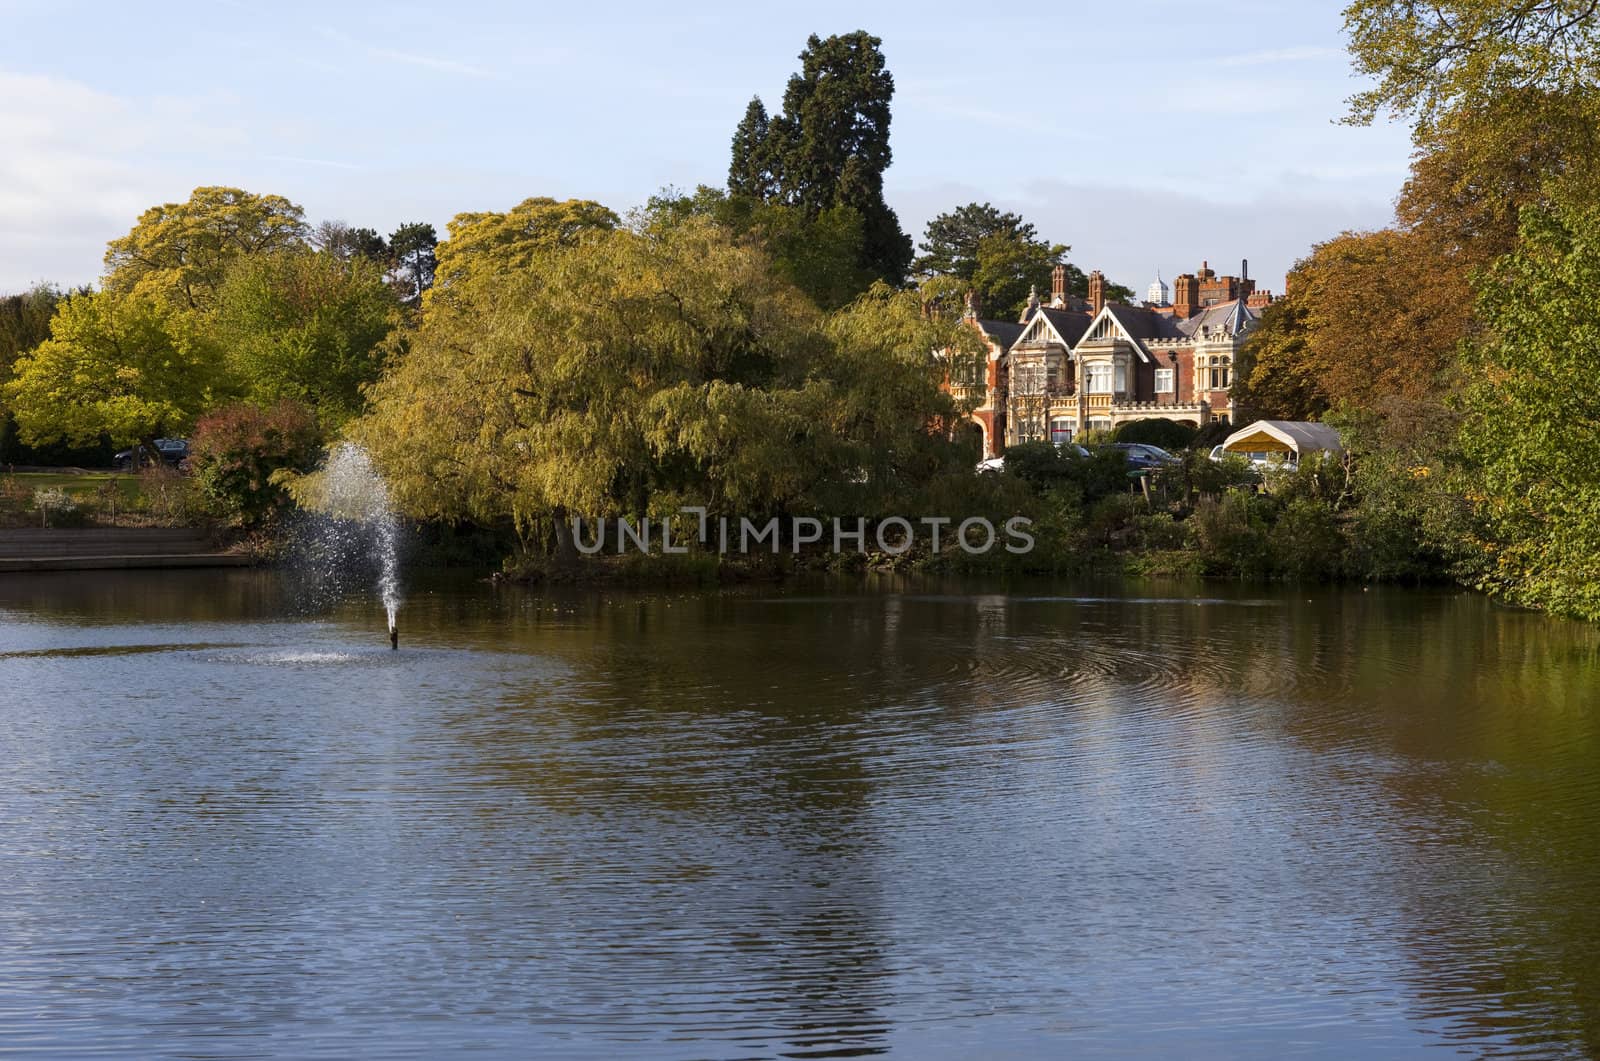 A view of Bletchley Park.